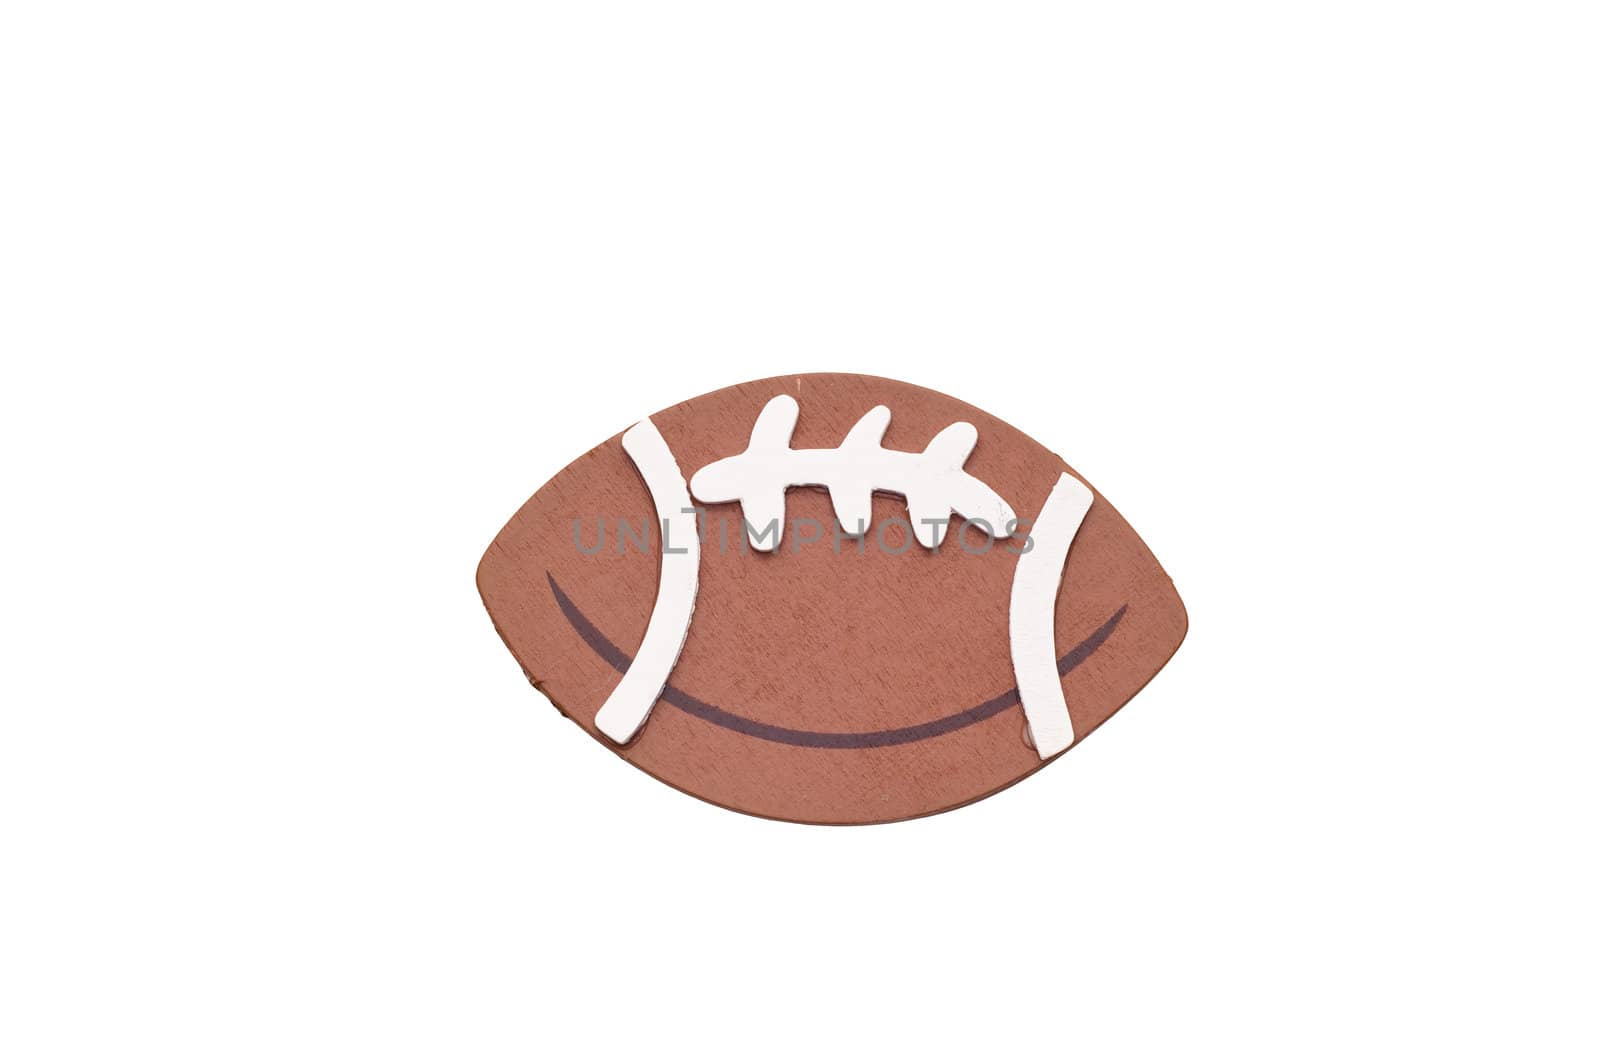 3d American football isolated on white background.